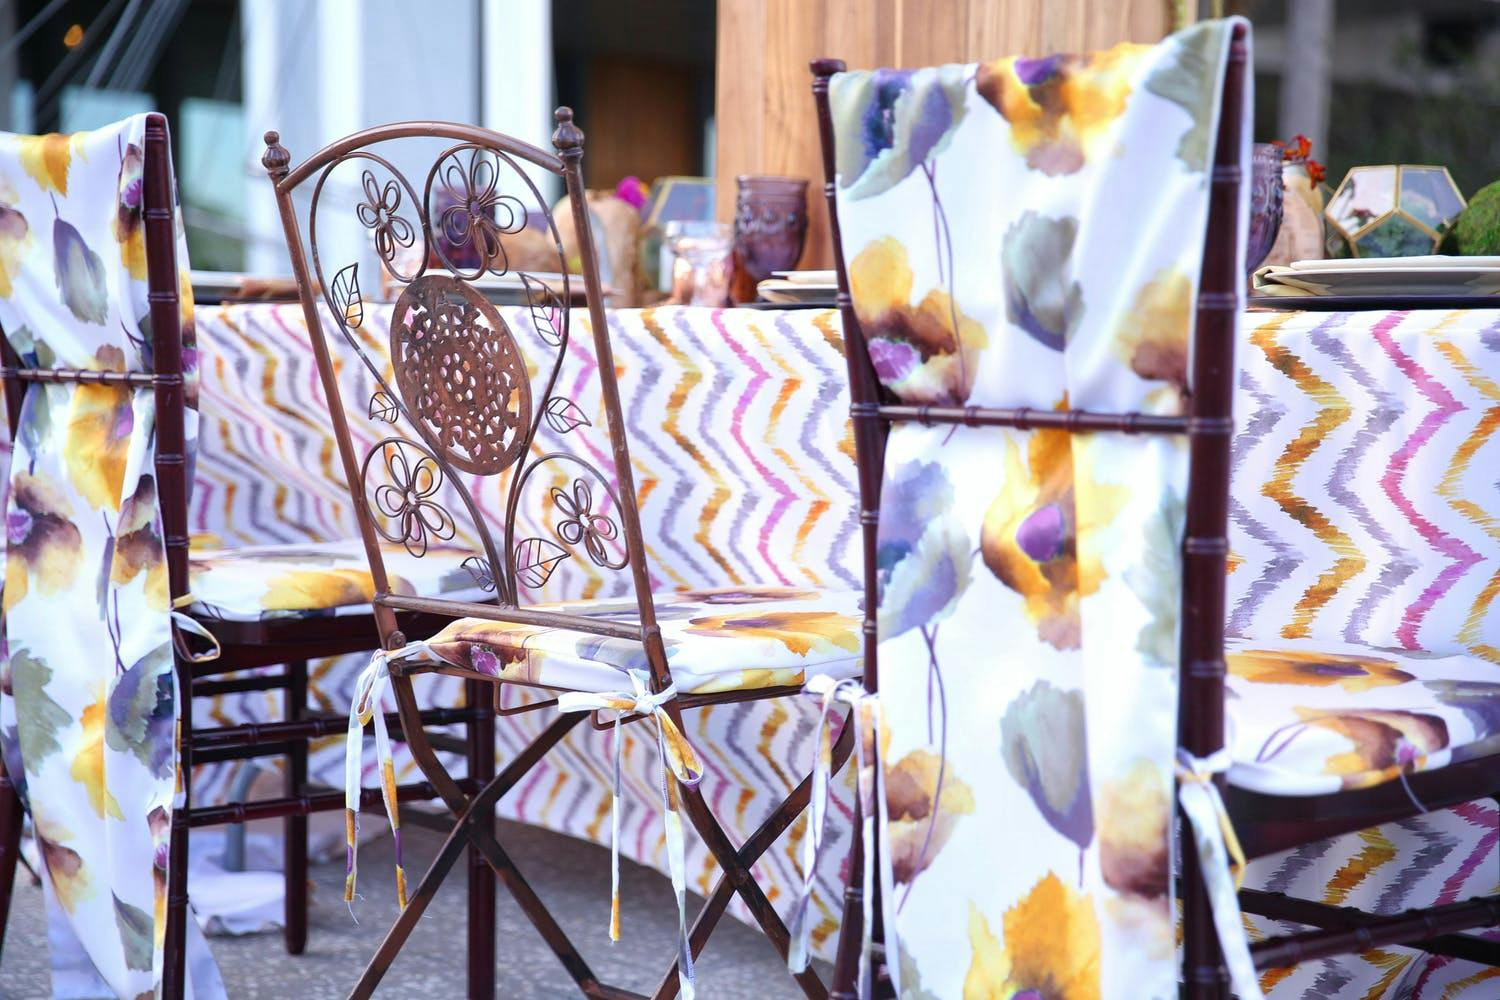 Bohemian wedding with purple and yellow floral seating drapery | PartySlate